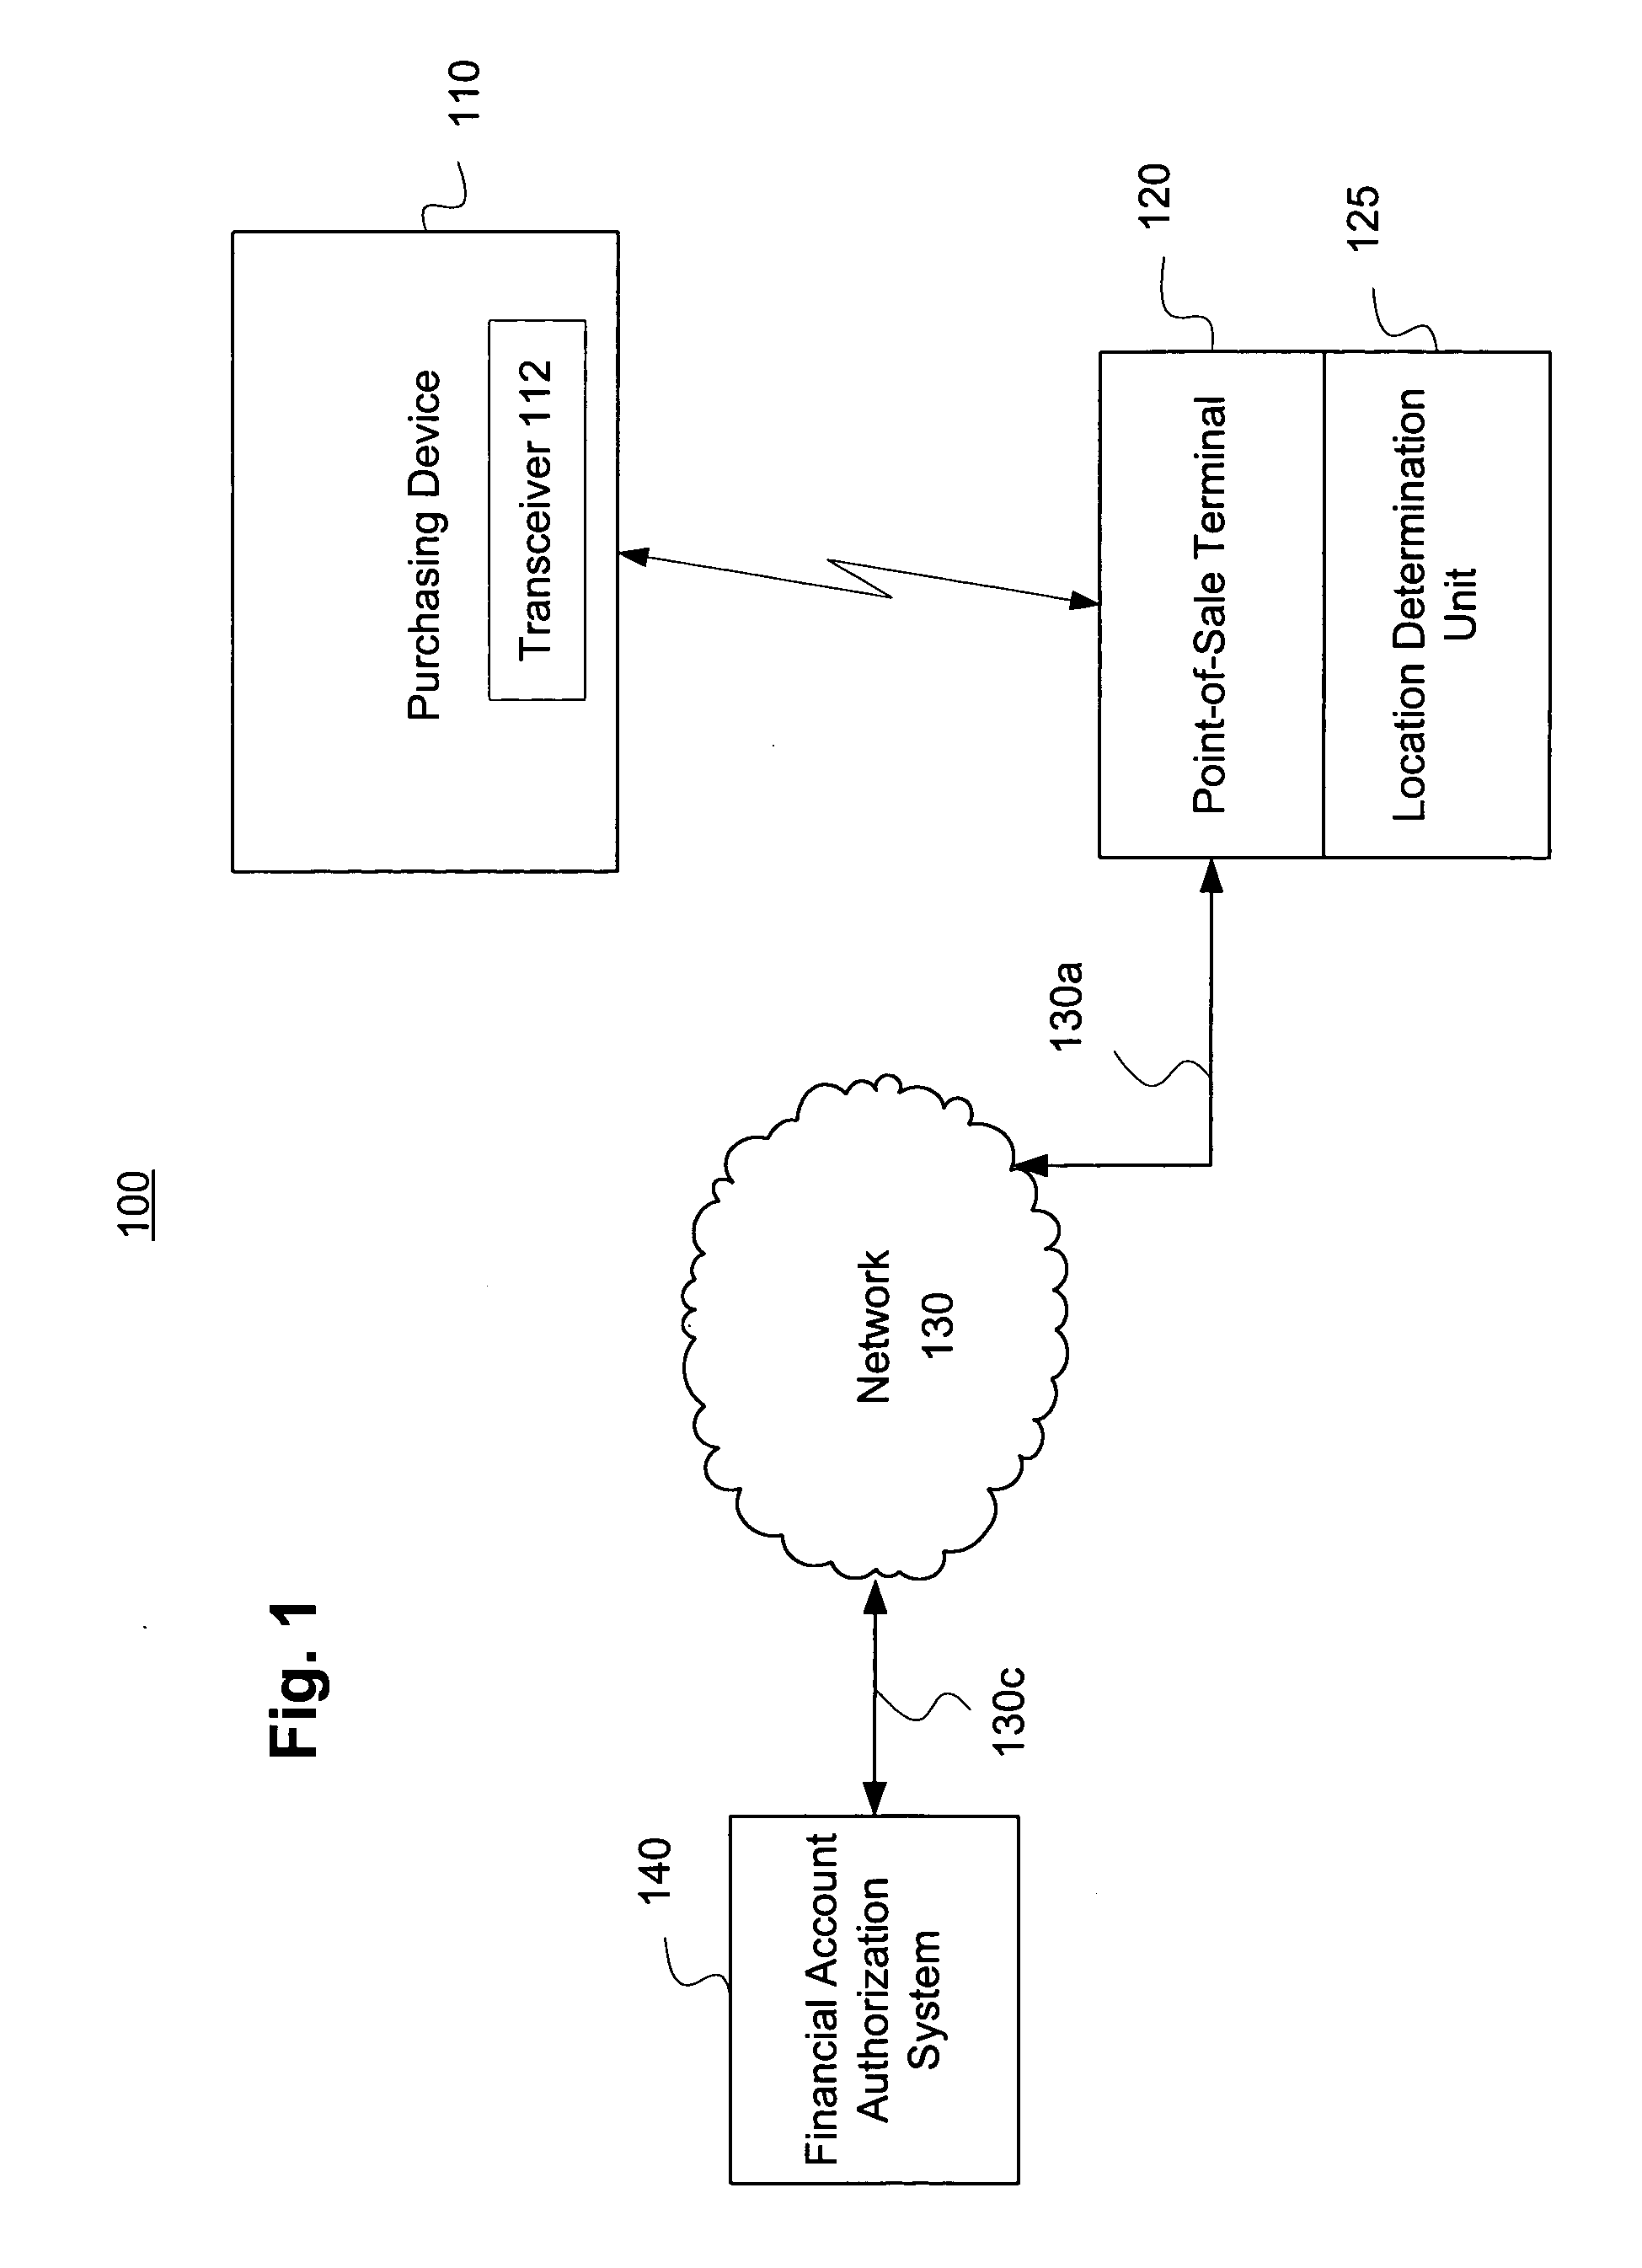 Systems and methods for authorizing a transaction for a financial account